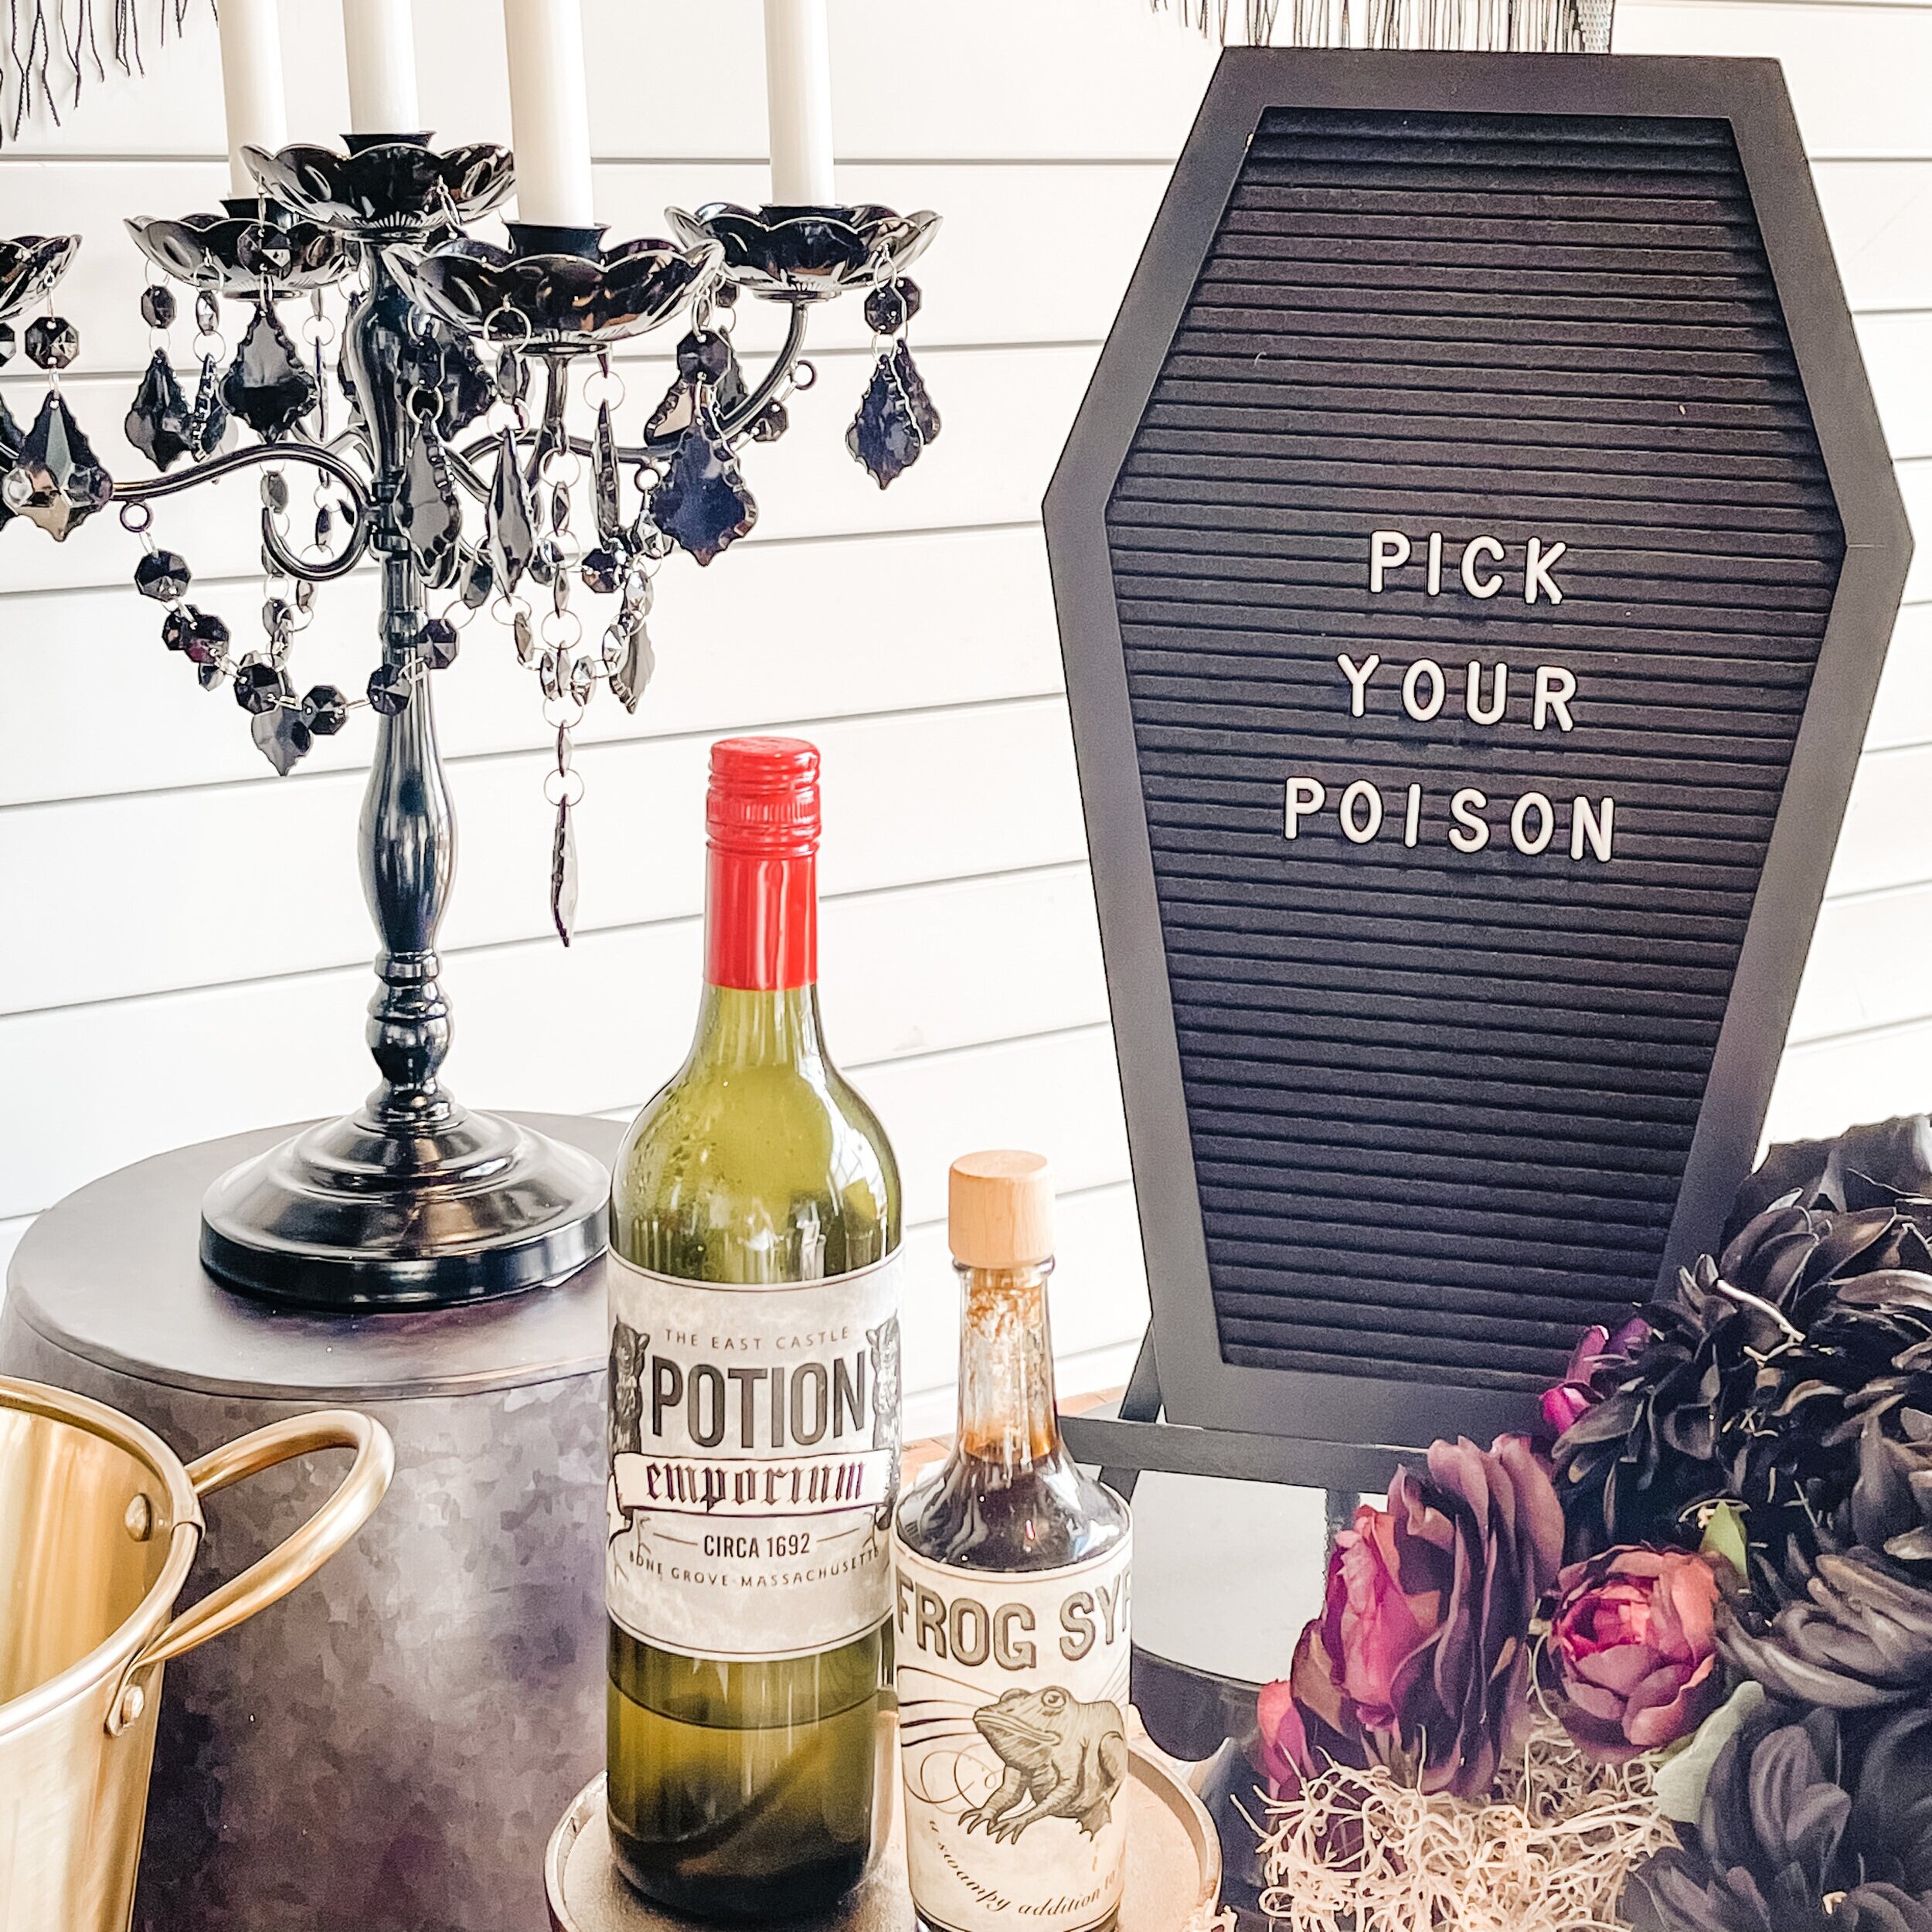 Throw a fun “Death to my Twenties” 30th Birthday Party with "Pick your Poison" drink station! Get ideas for welcome area, food bar, decor and more now at minteventdesign.com!